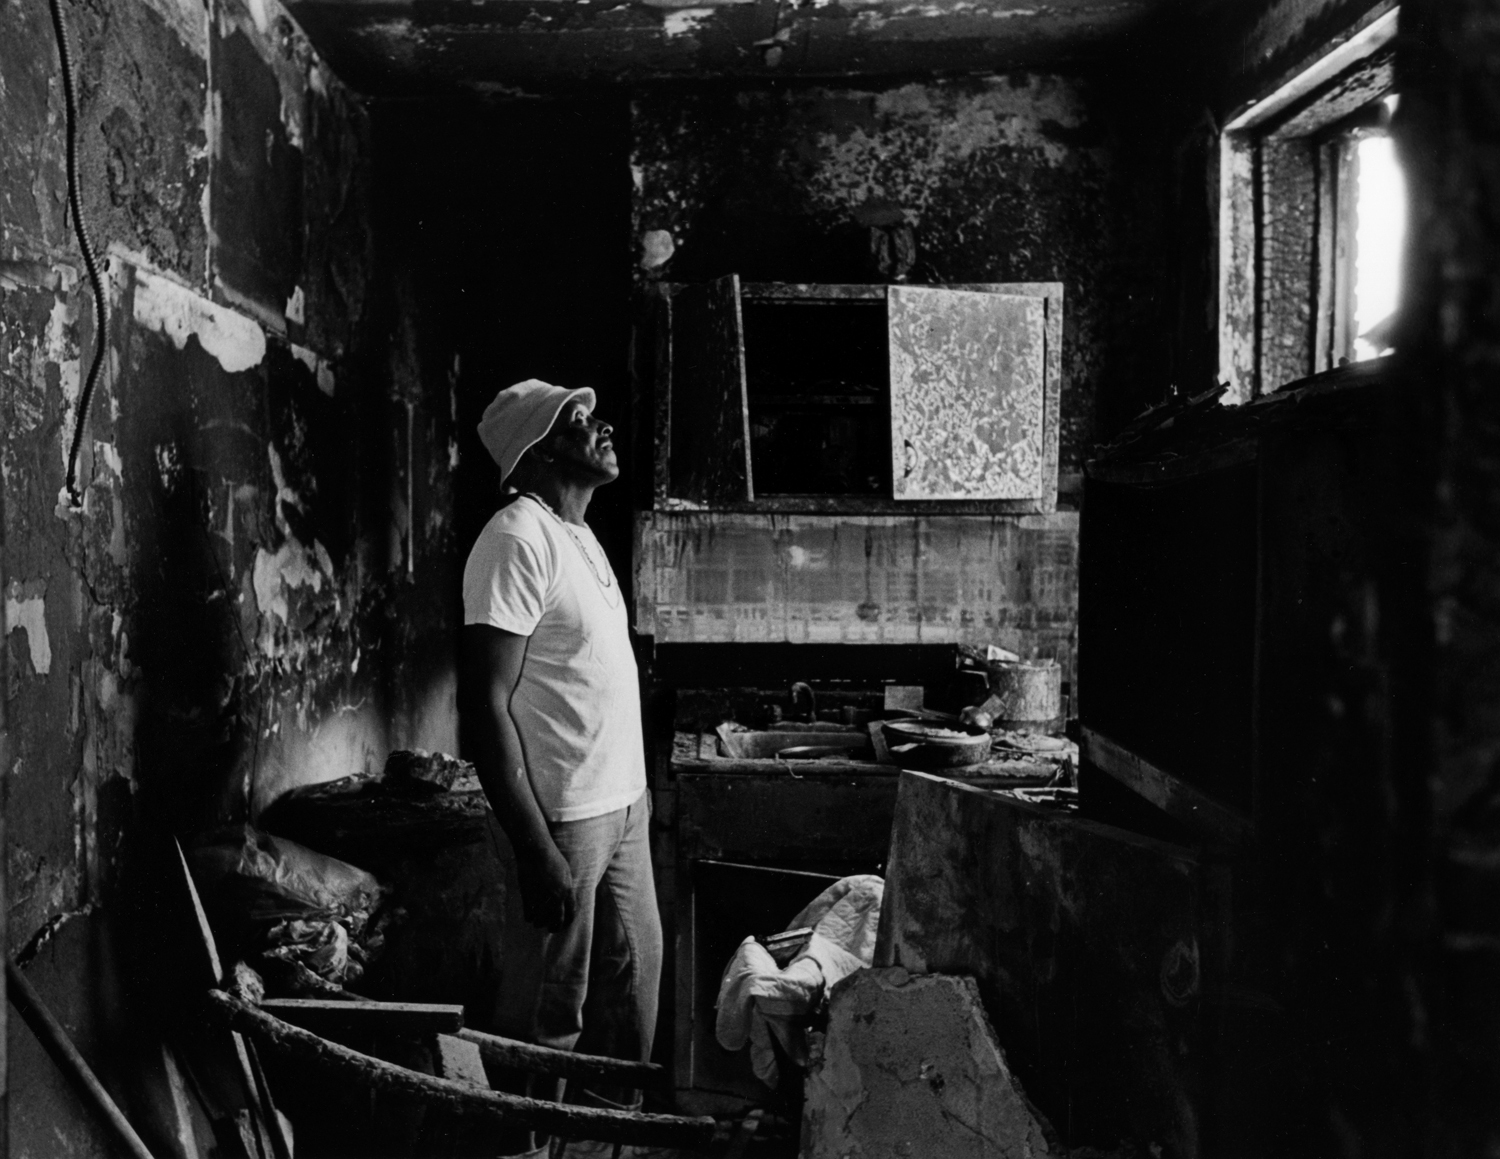 Bobby, the Super inspects apartment that was firebombed during tenant dispute. : Carmel Hill Harlem NYC 1995-2000 : BILL FOLEY 